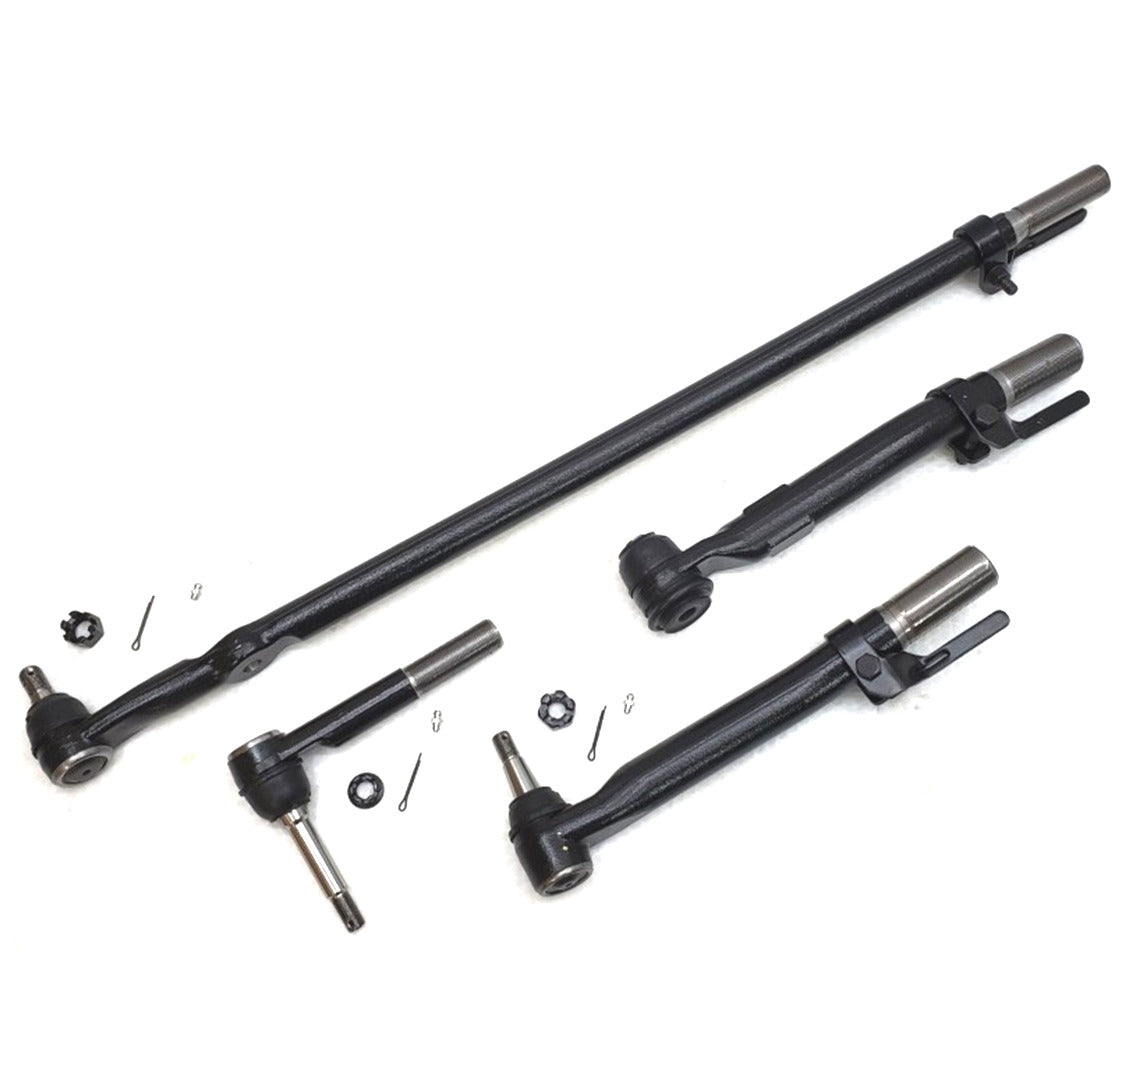 XRF Drag Link Tie Rod Steering Kit for 2011-2019 Ford F450, F550 Super Duty with Bent Pitman Arm